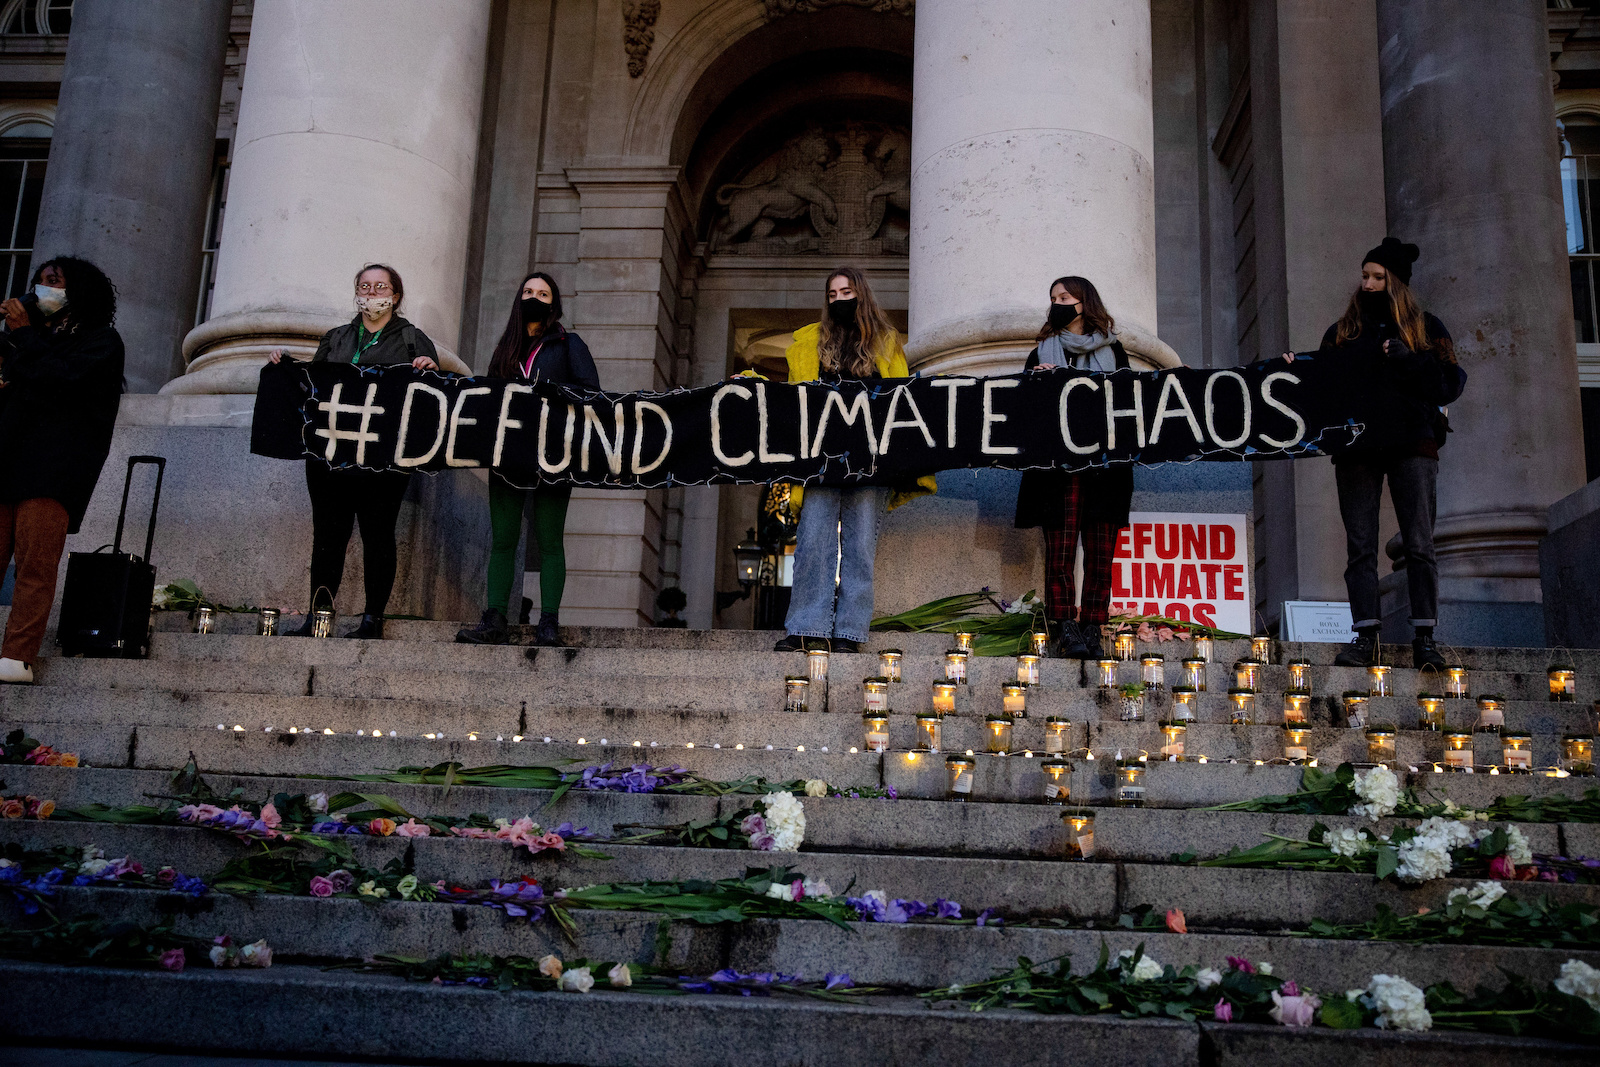 Defund climate chaos